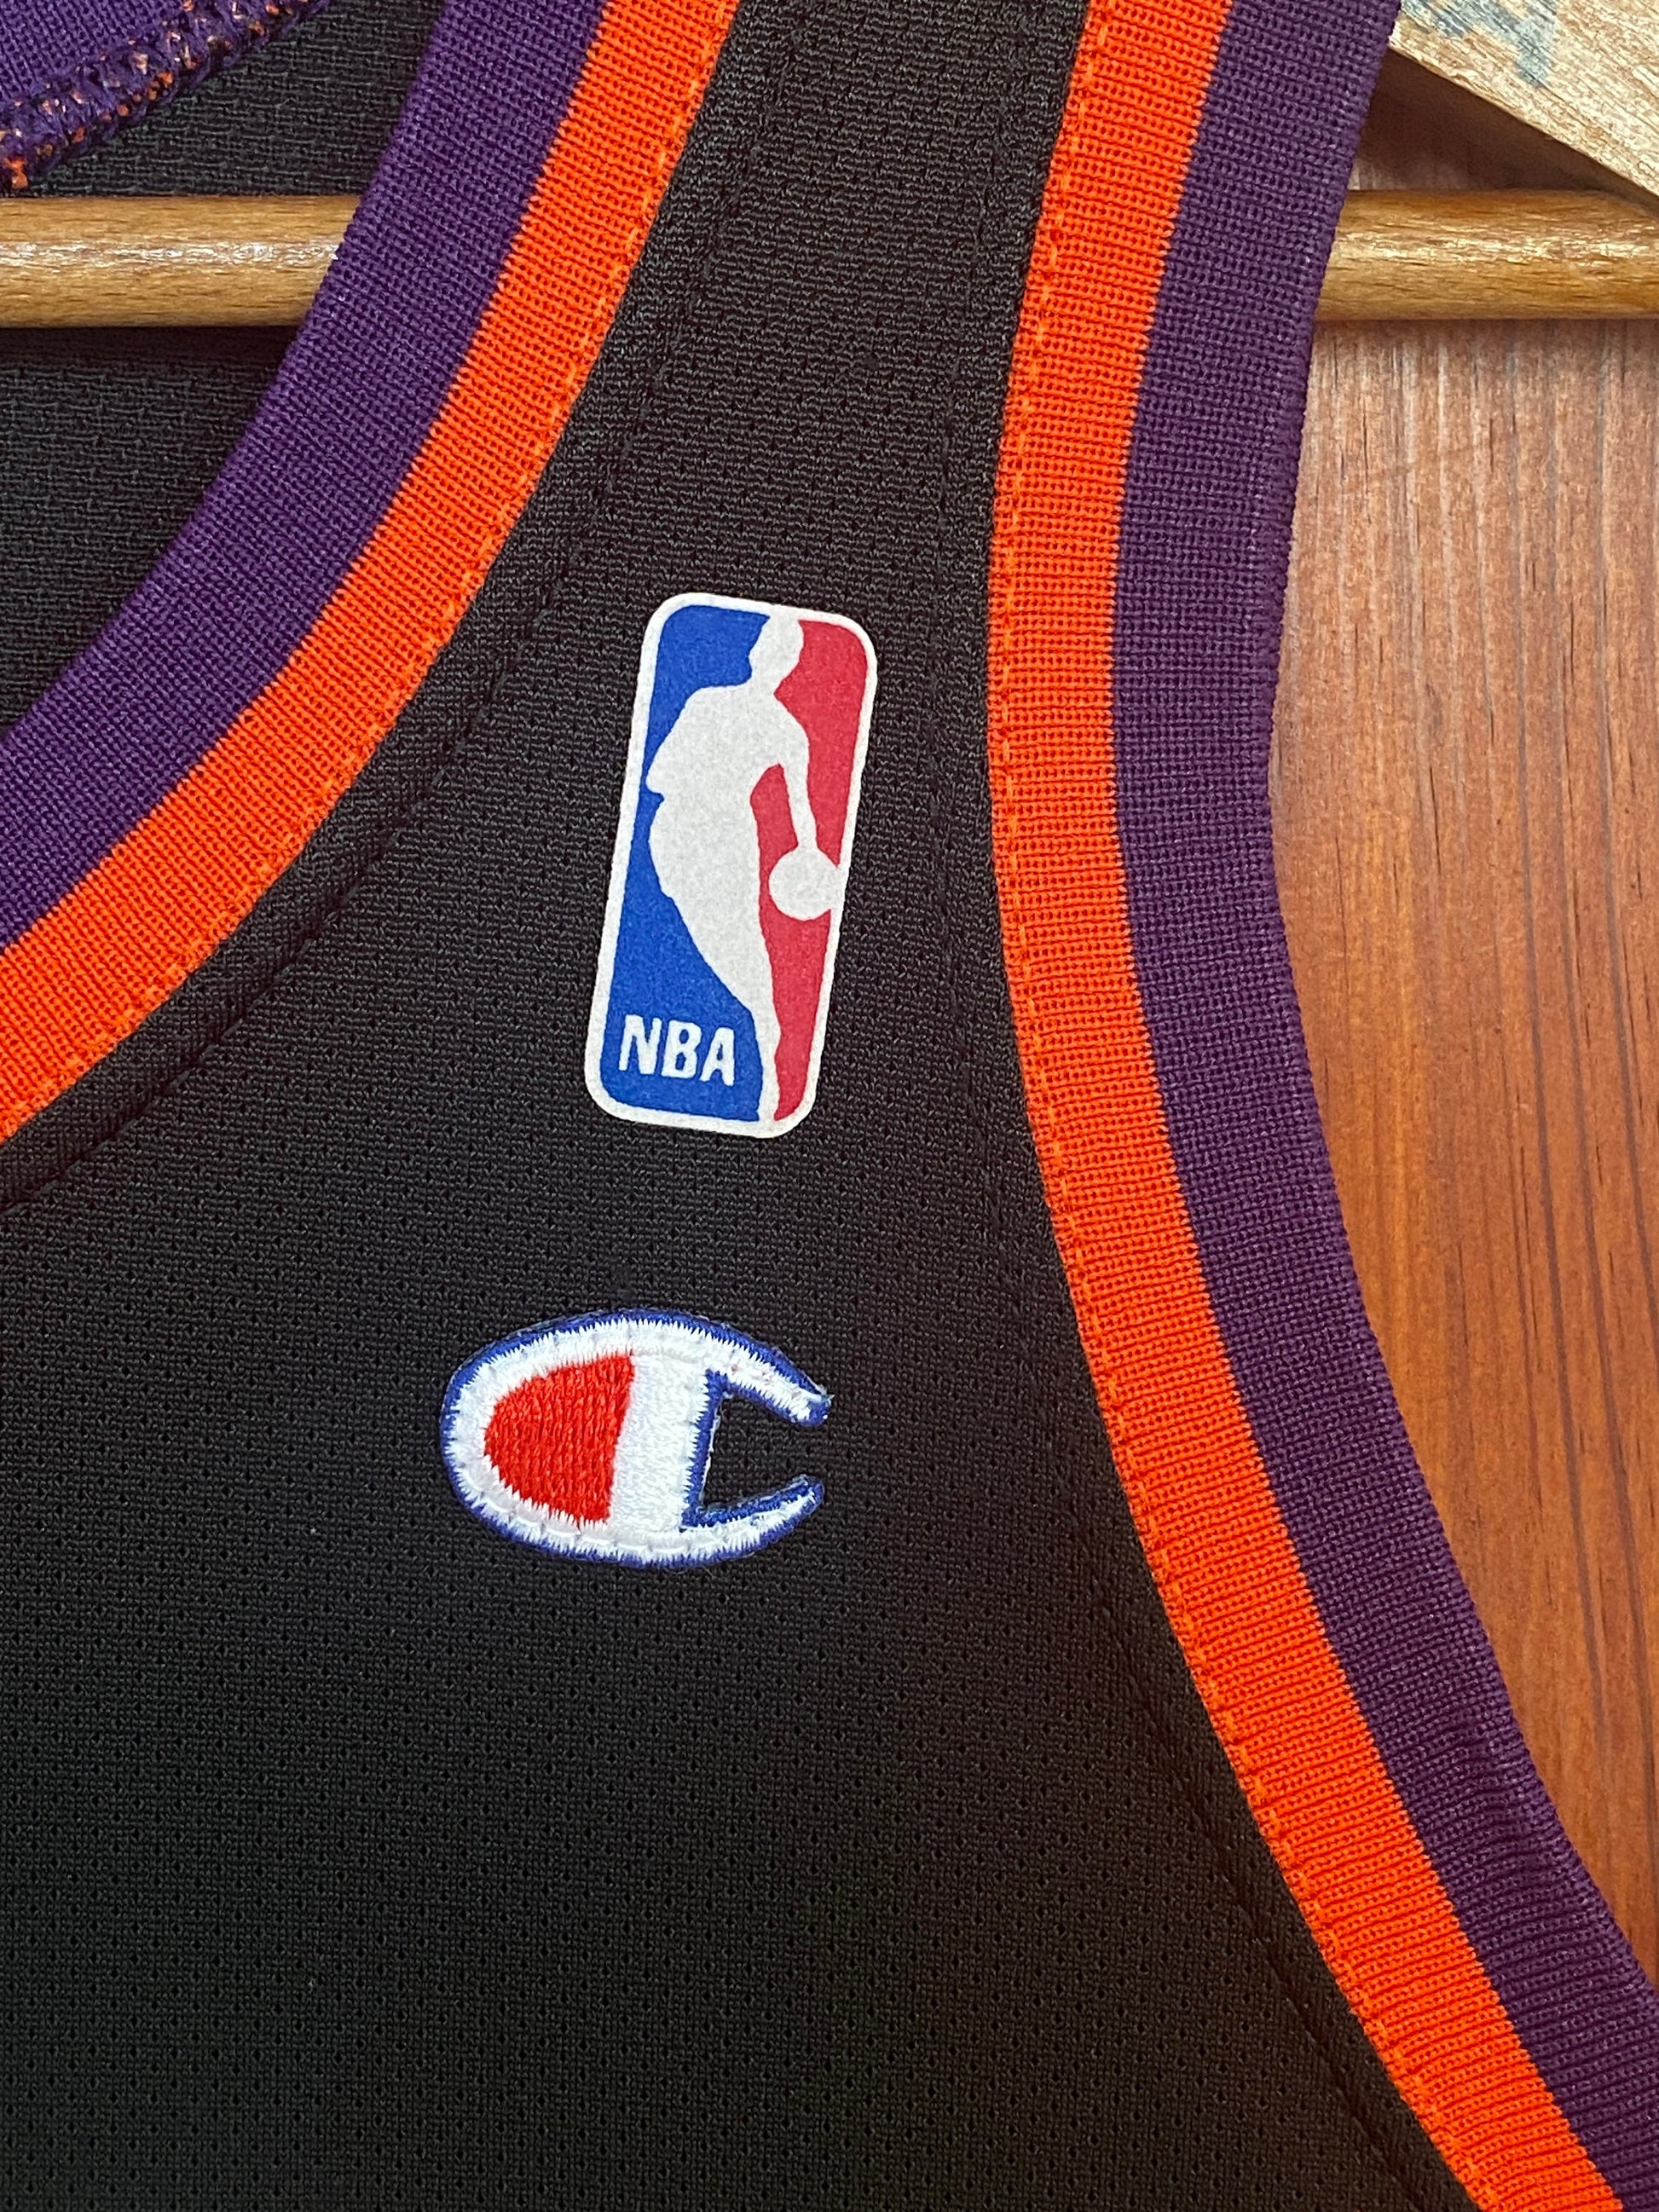 Vintage 90s NBA Phoenix Suns Charles Barkley #34 jersey, size 44 - front view. Made in USA by Champion.